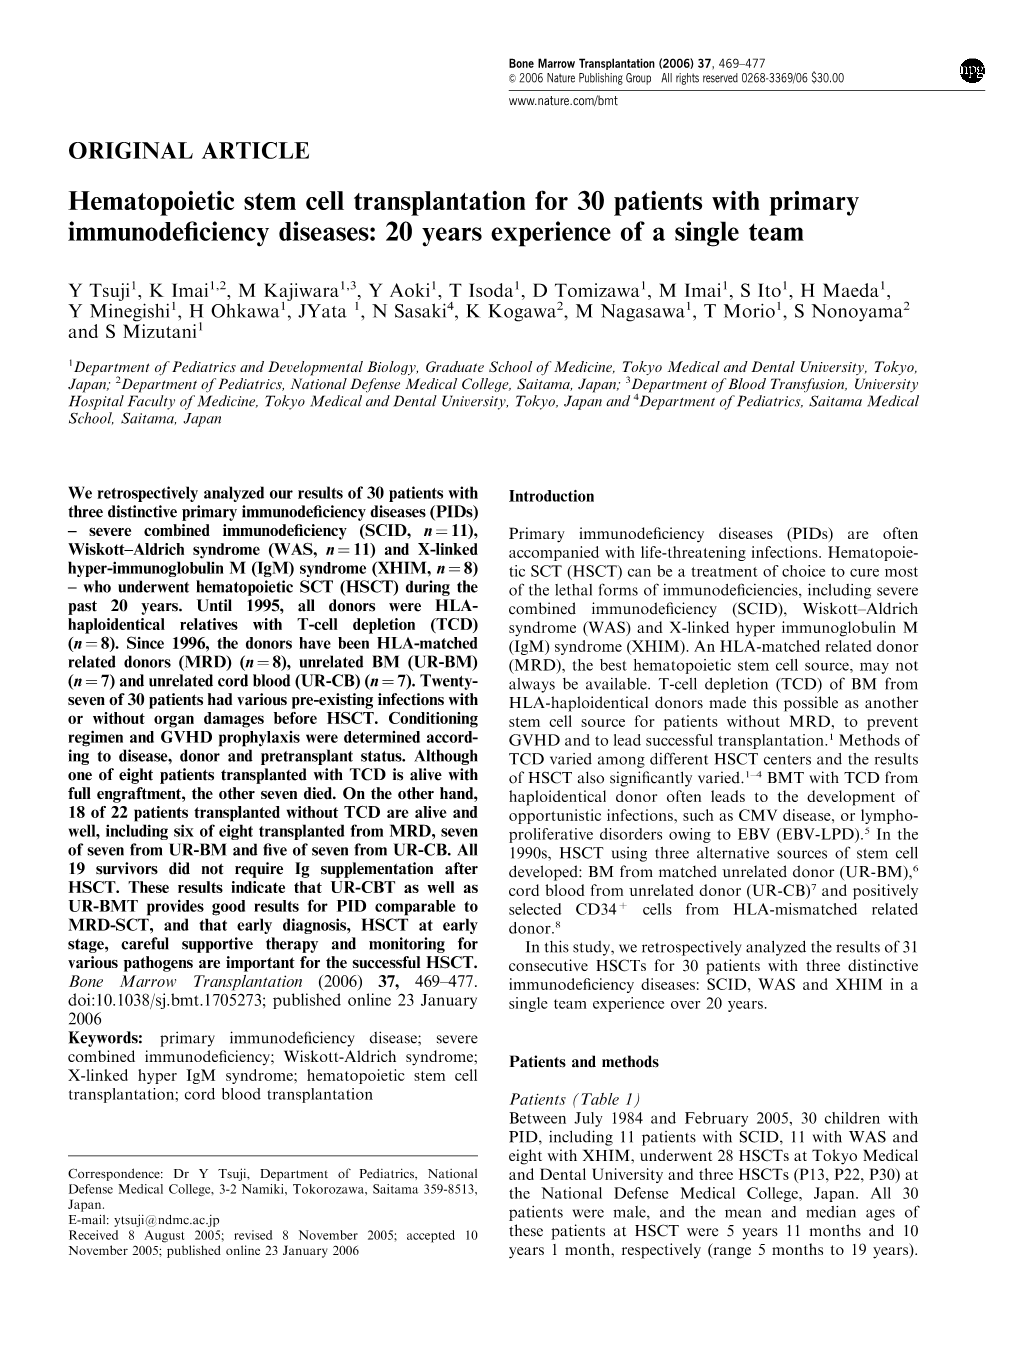 Hematopoietic Stem Cell Transplantation for 30 Patients with Primary Immunodeﬁciency Diseases: 20 Years Experience of a Single Team